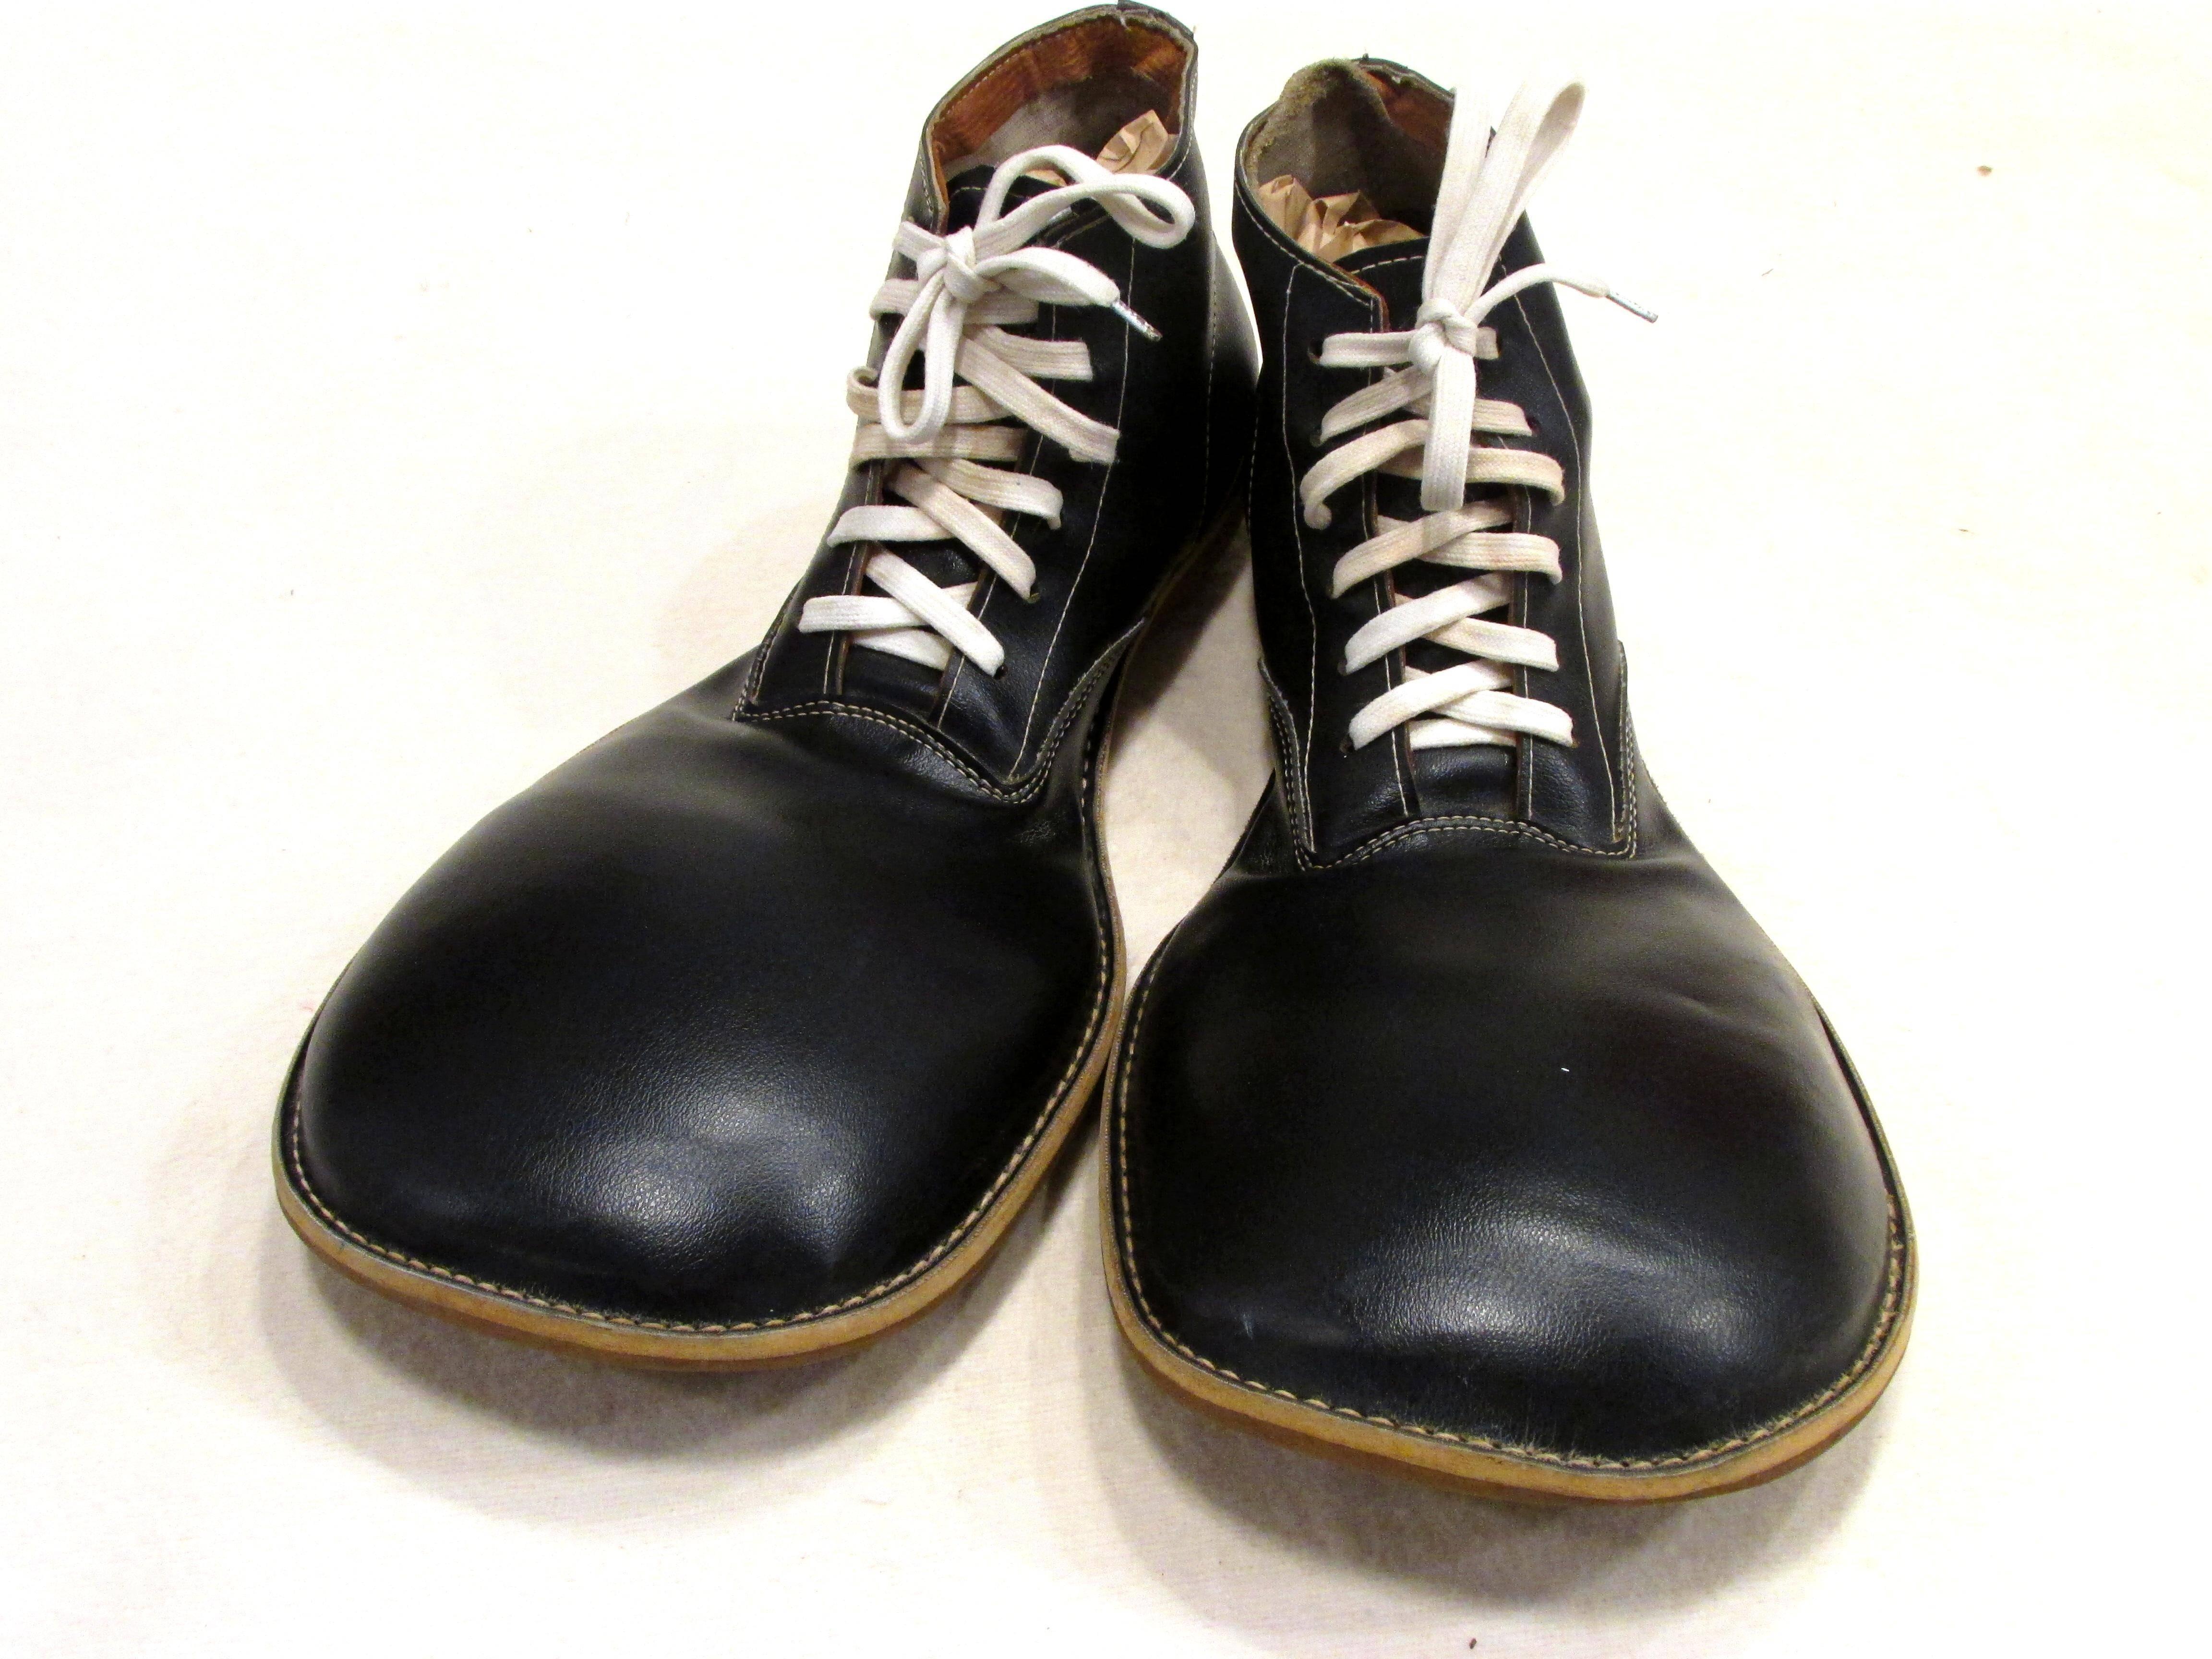 Pair of bit toed formal black leather vintage clown shoes to go with clown tux with man-made sole
From my collection of vintage Clown Shoes